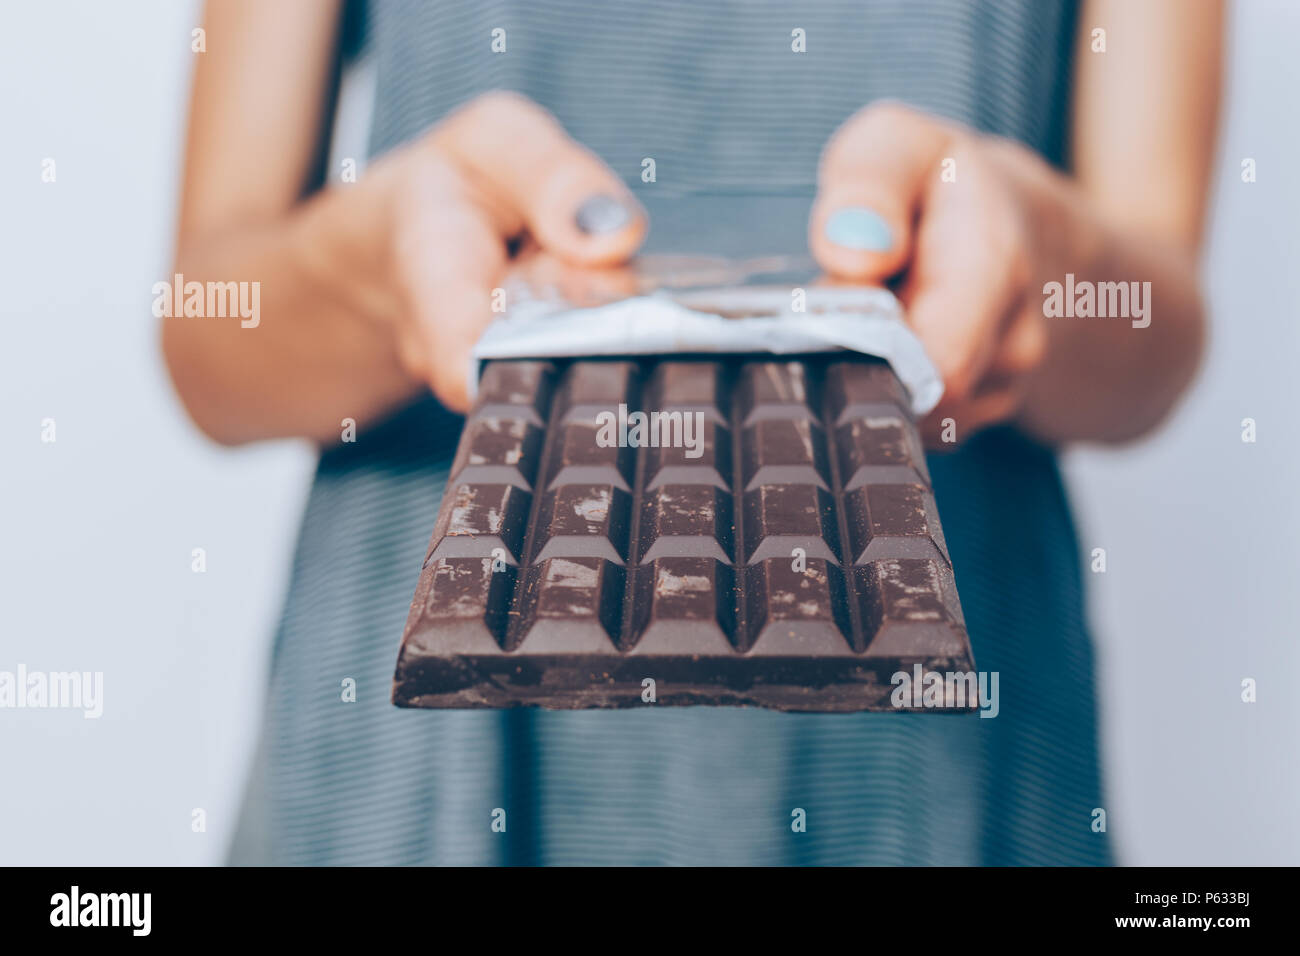 Woman's hands holding unwrapped dark chocolate bar, close-up. Unrecognizable female standing and giving dessert. Stock Photo